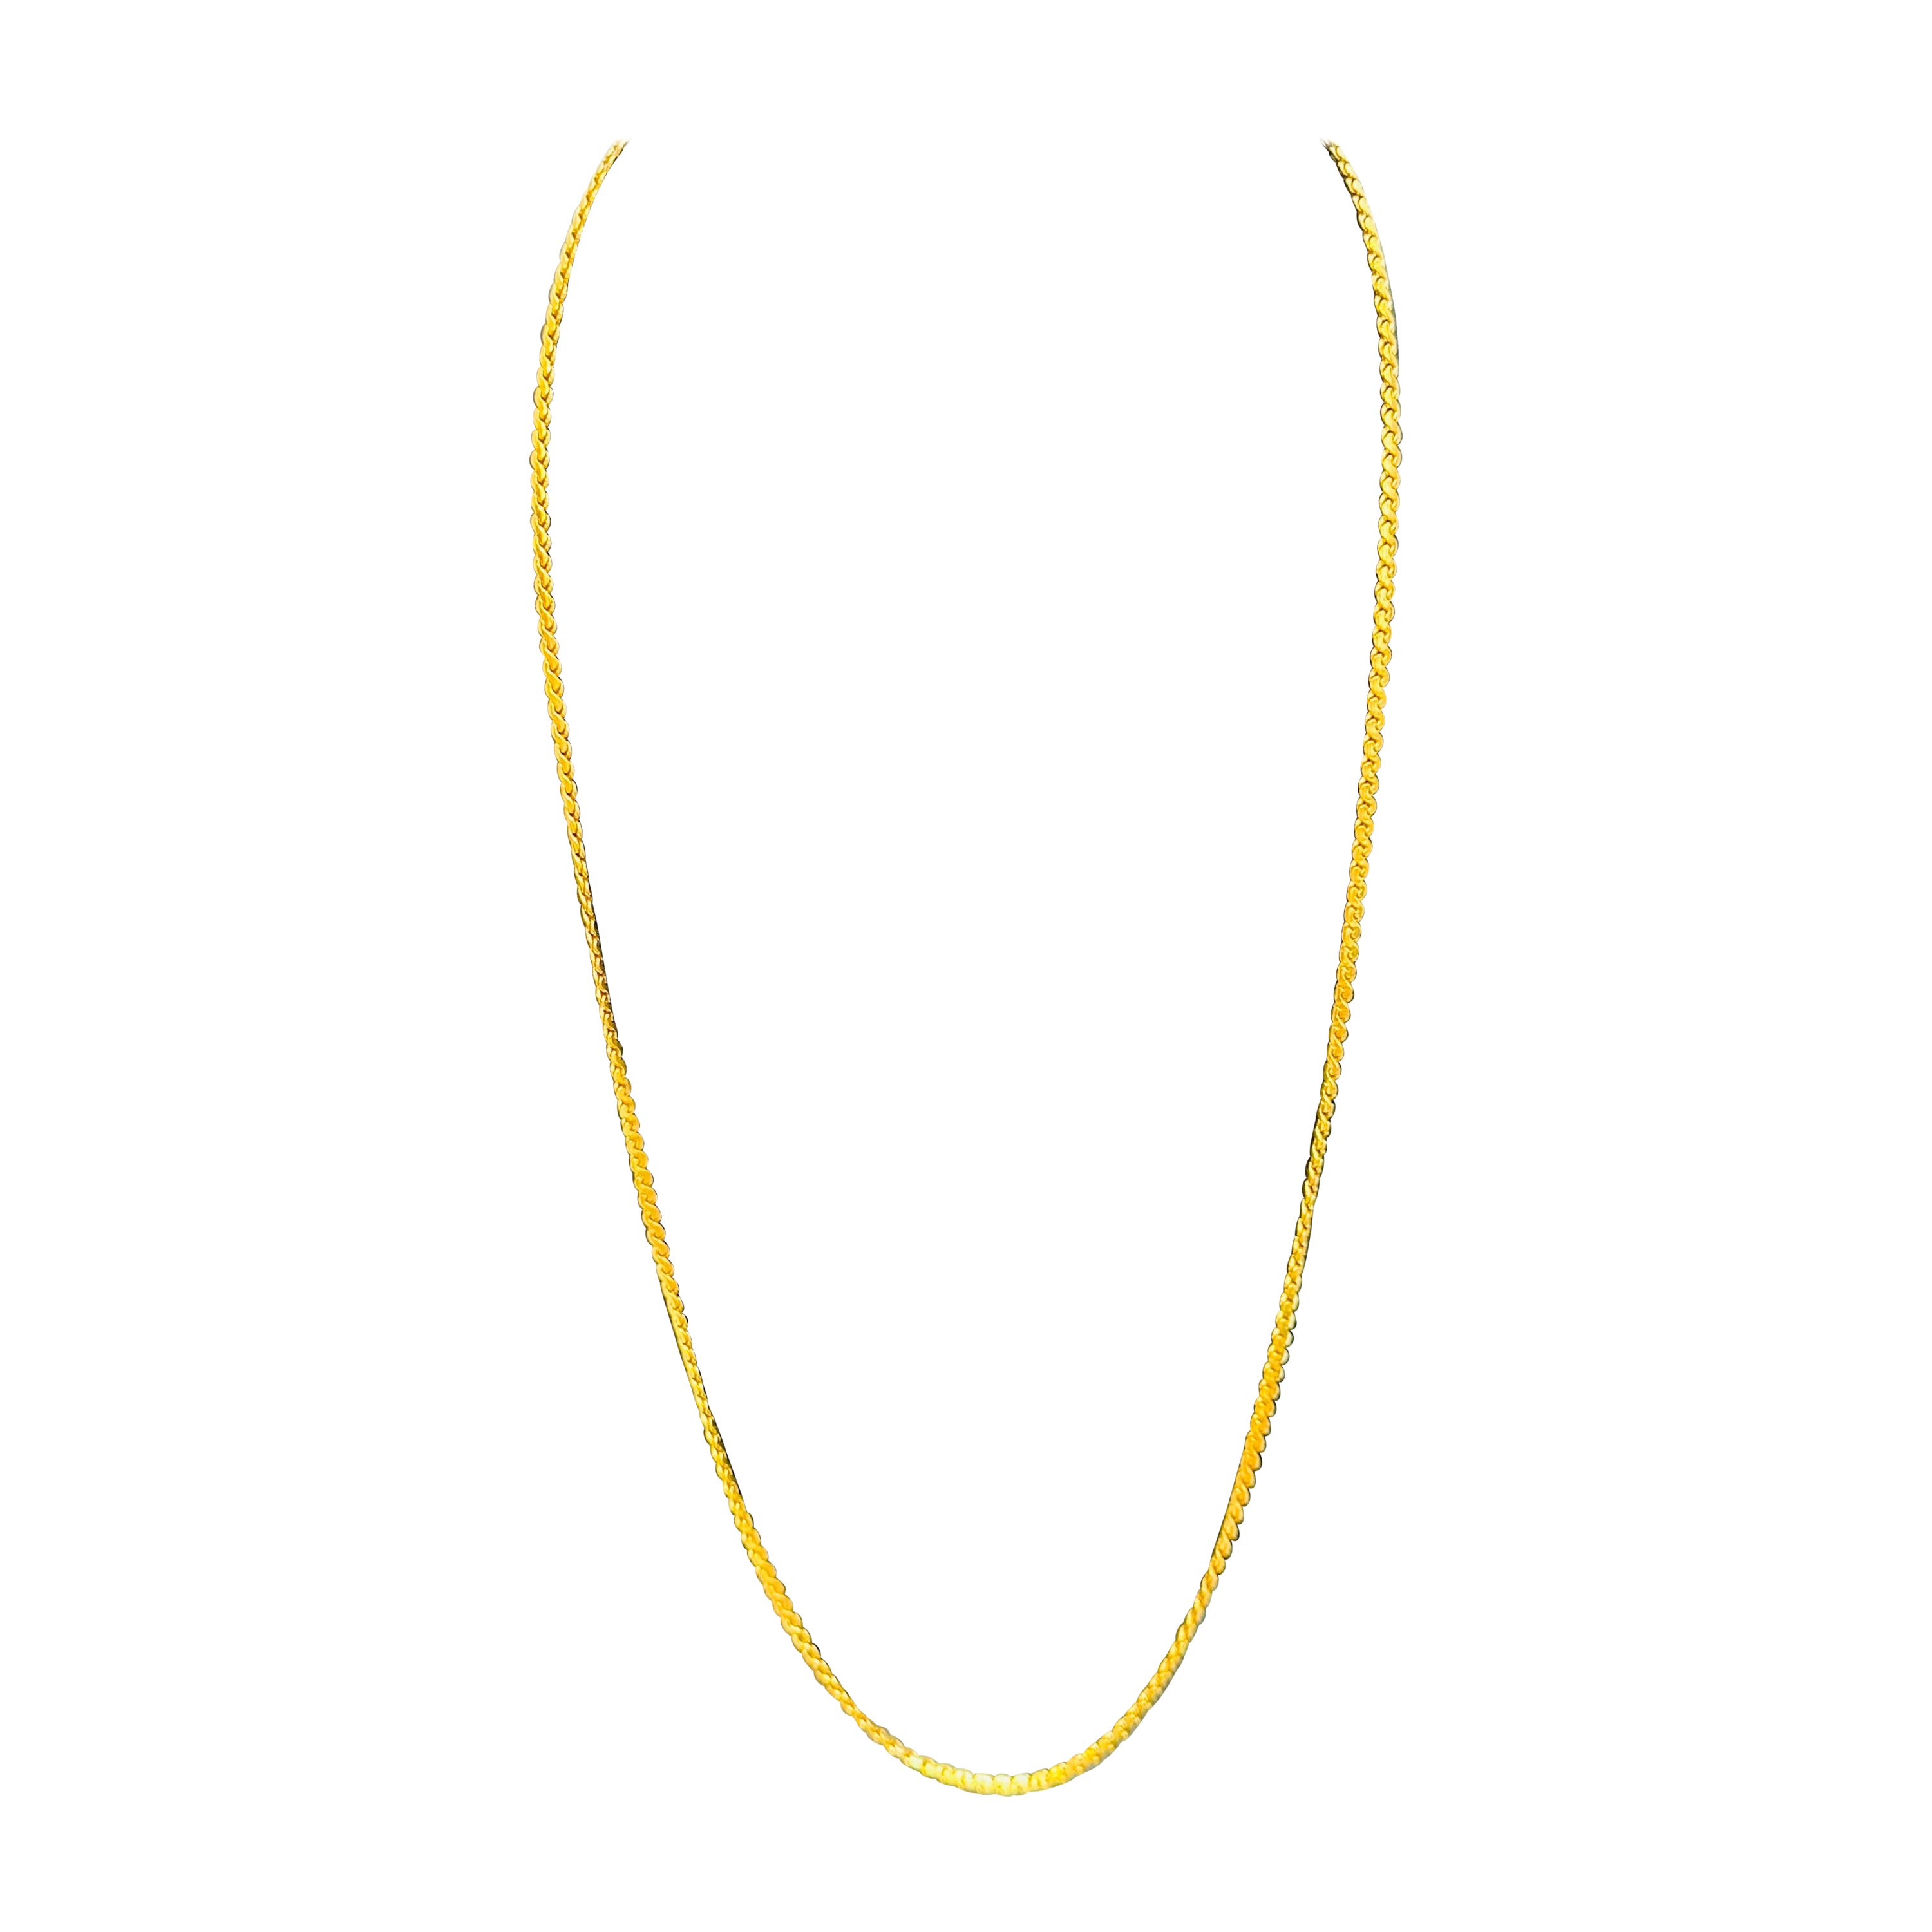 Vintage 18 Karat Yellow Gold 9.6 Gm S Link Chain Necklace For Sale